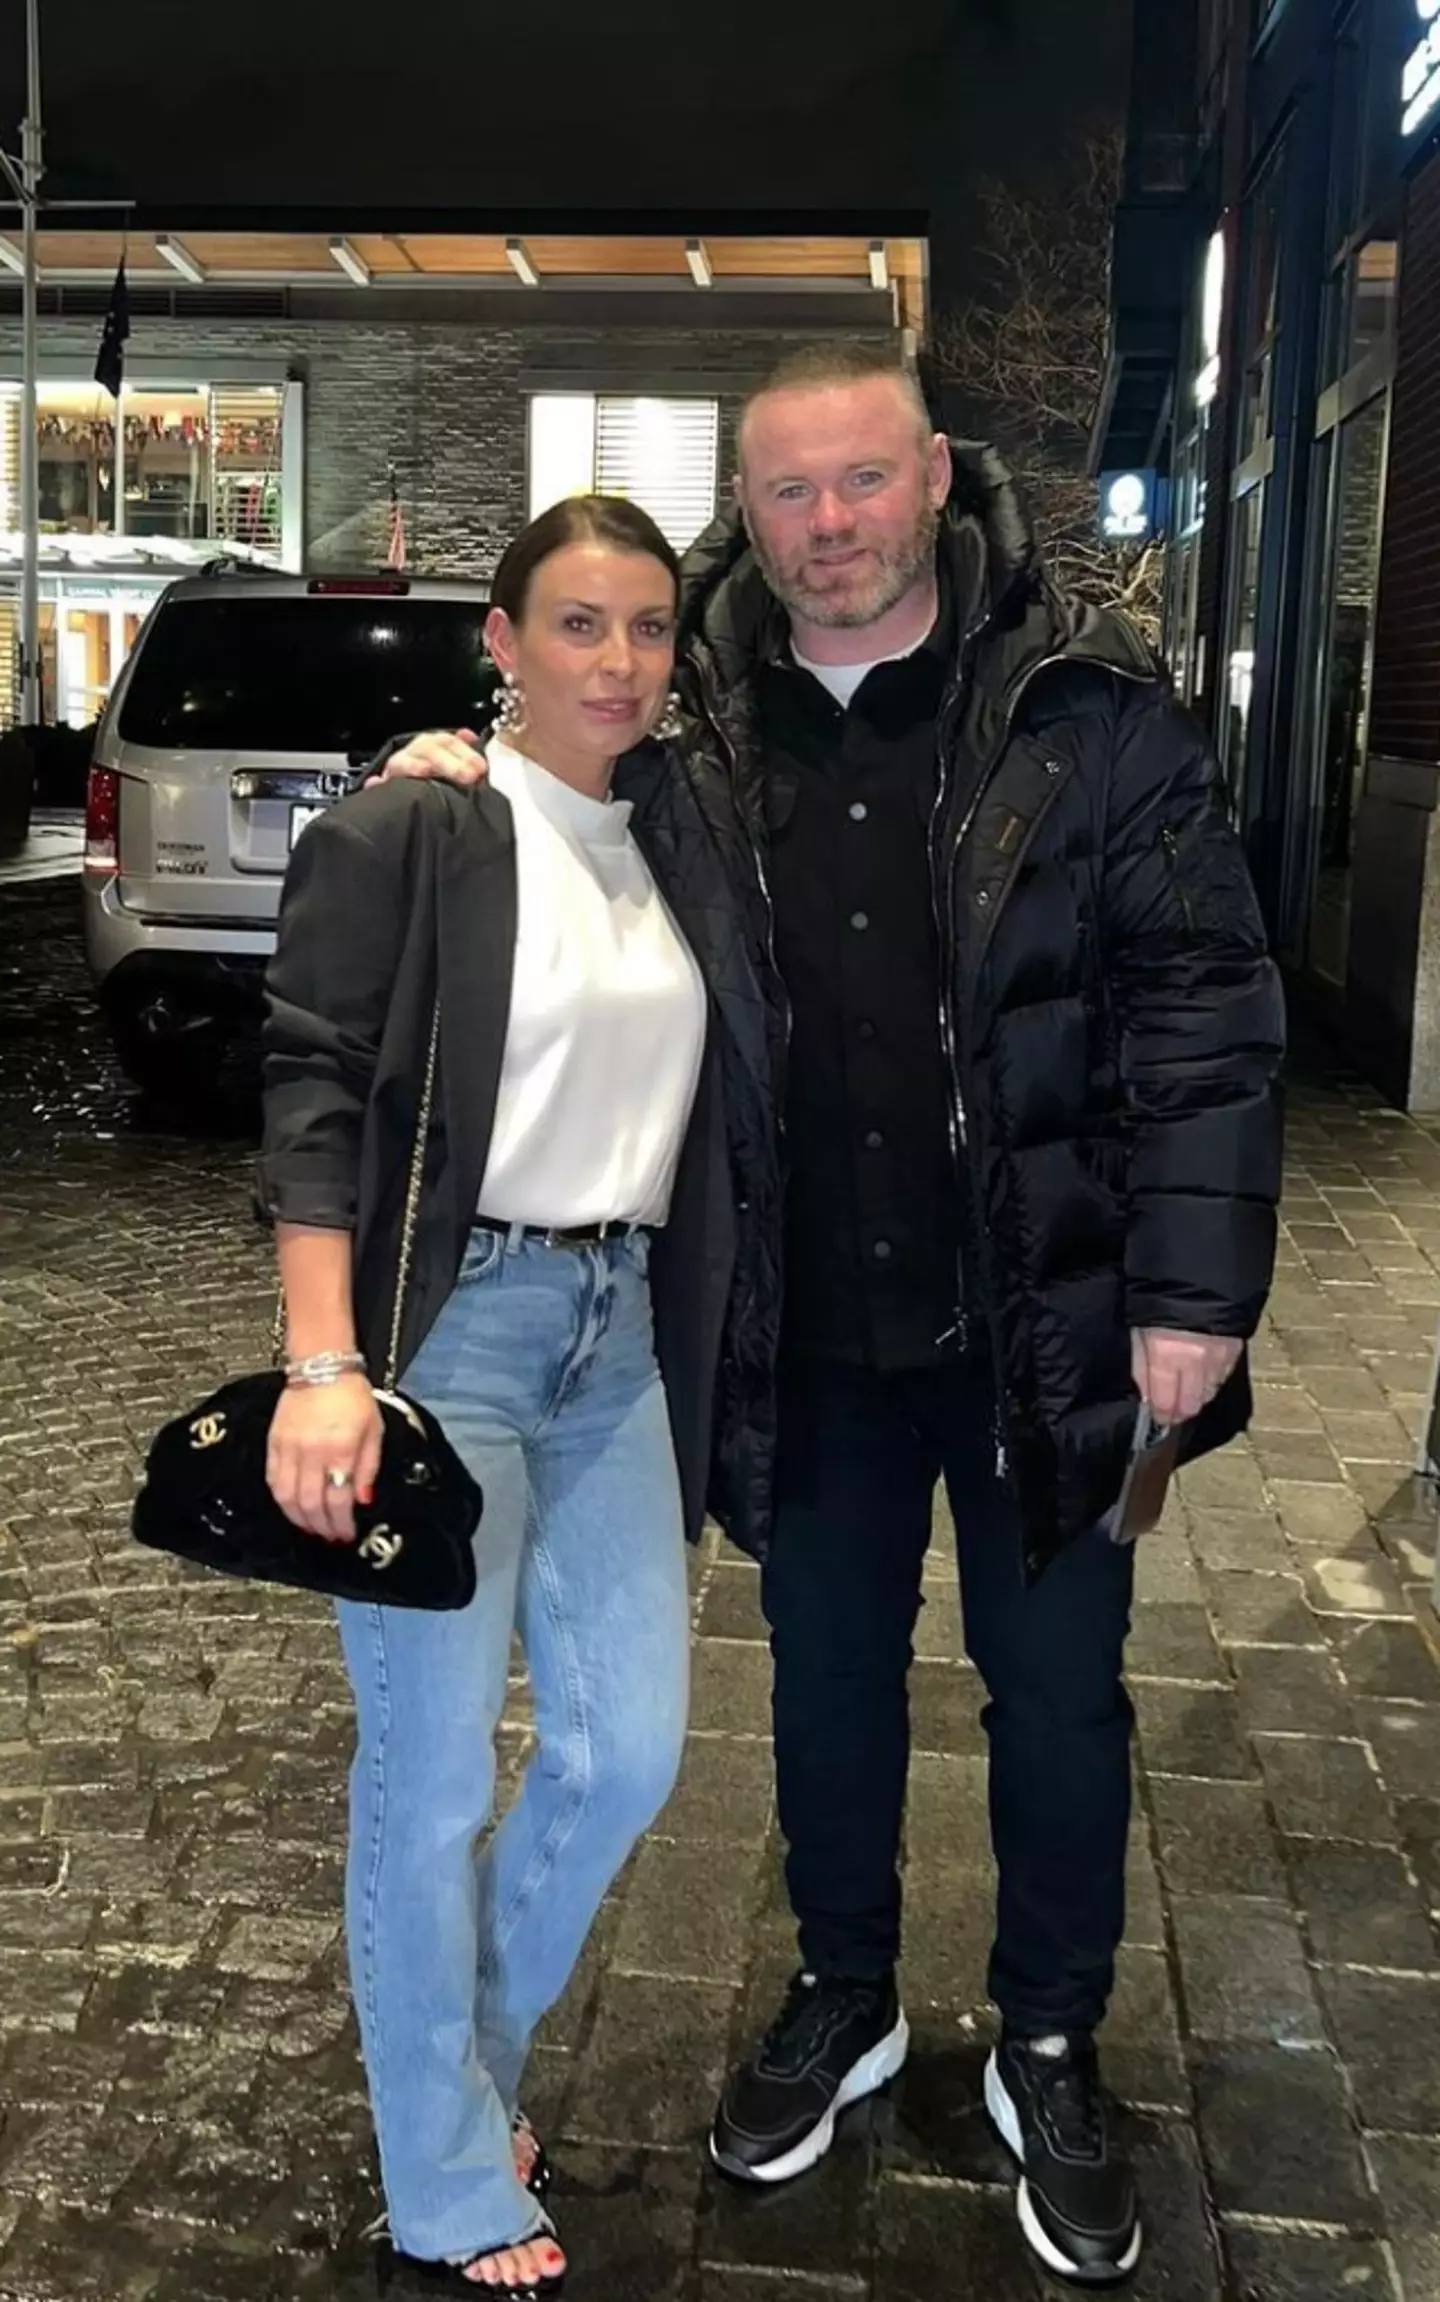 Rooney says she told the footballer "I just can't carry on with this".